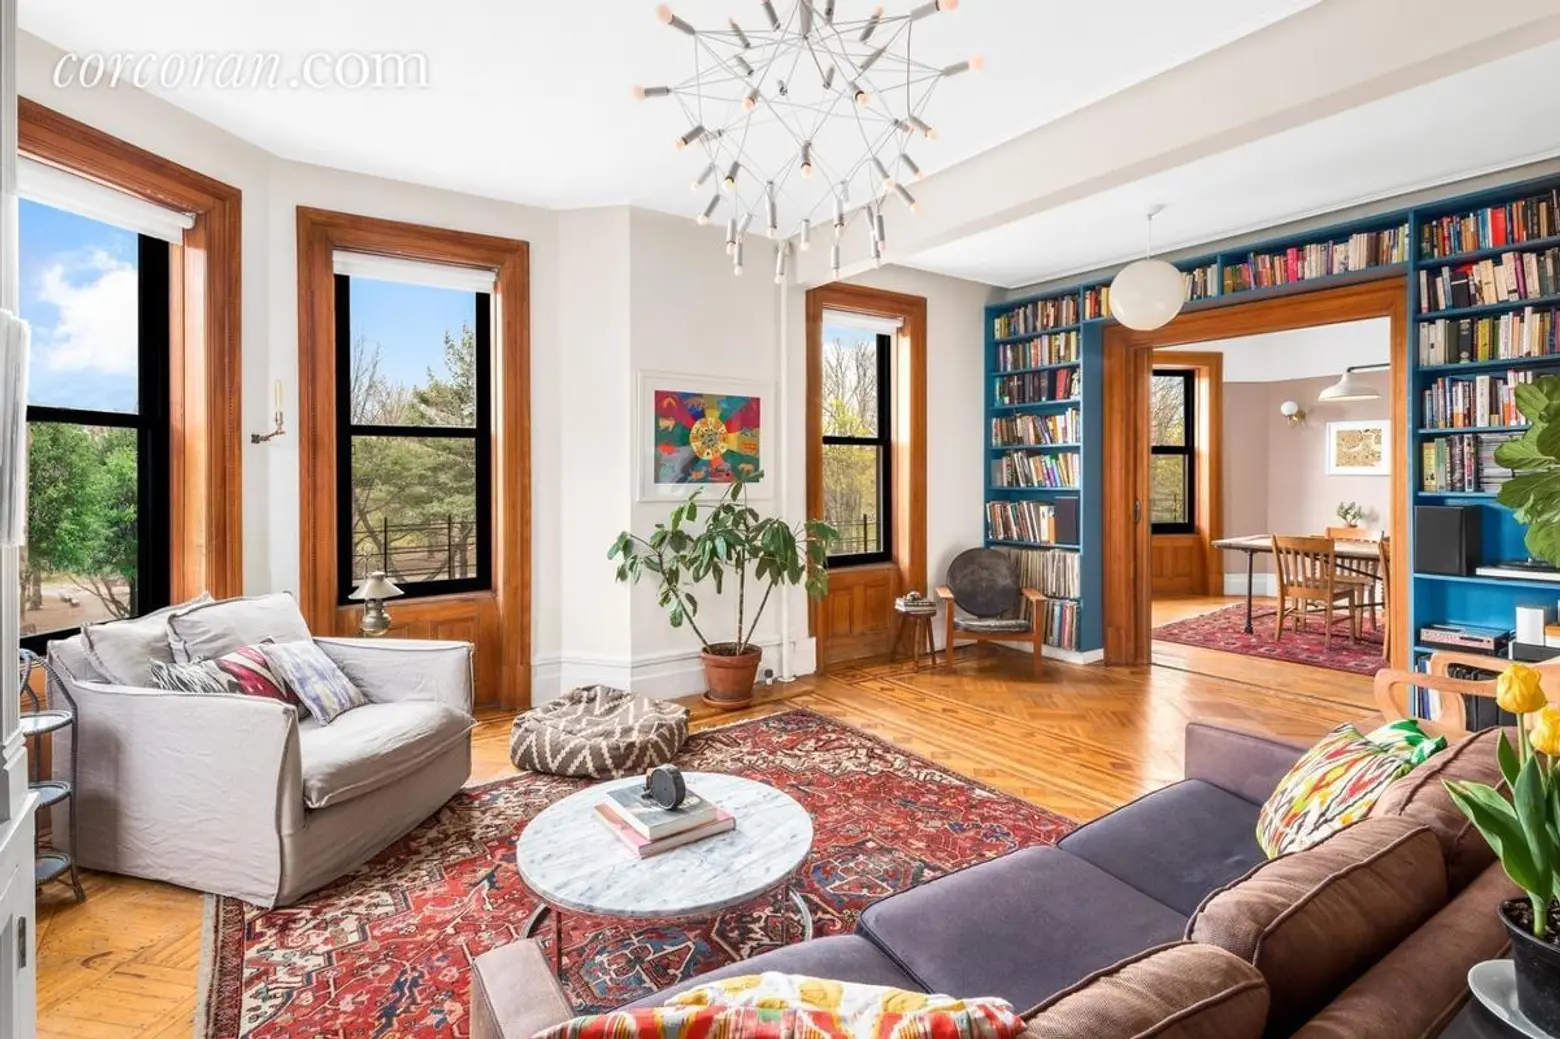 Cheery Prospect Park condo is house-sized with a smart layout and sophisticated details